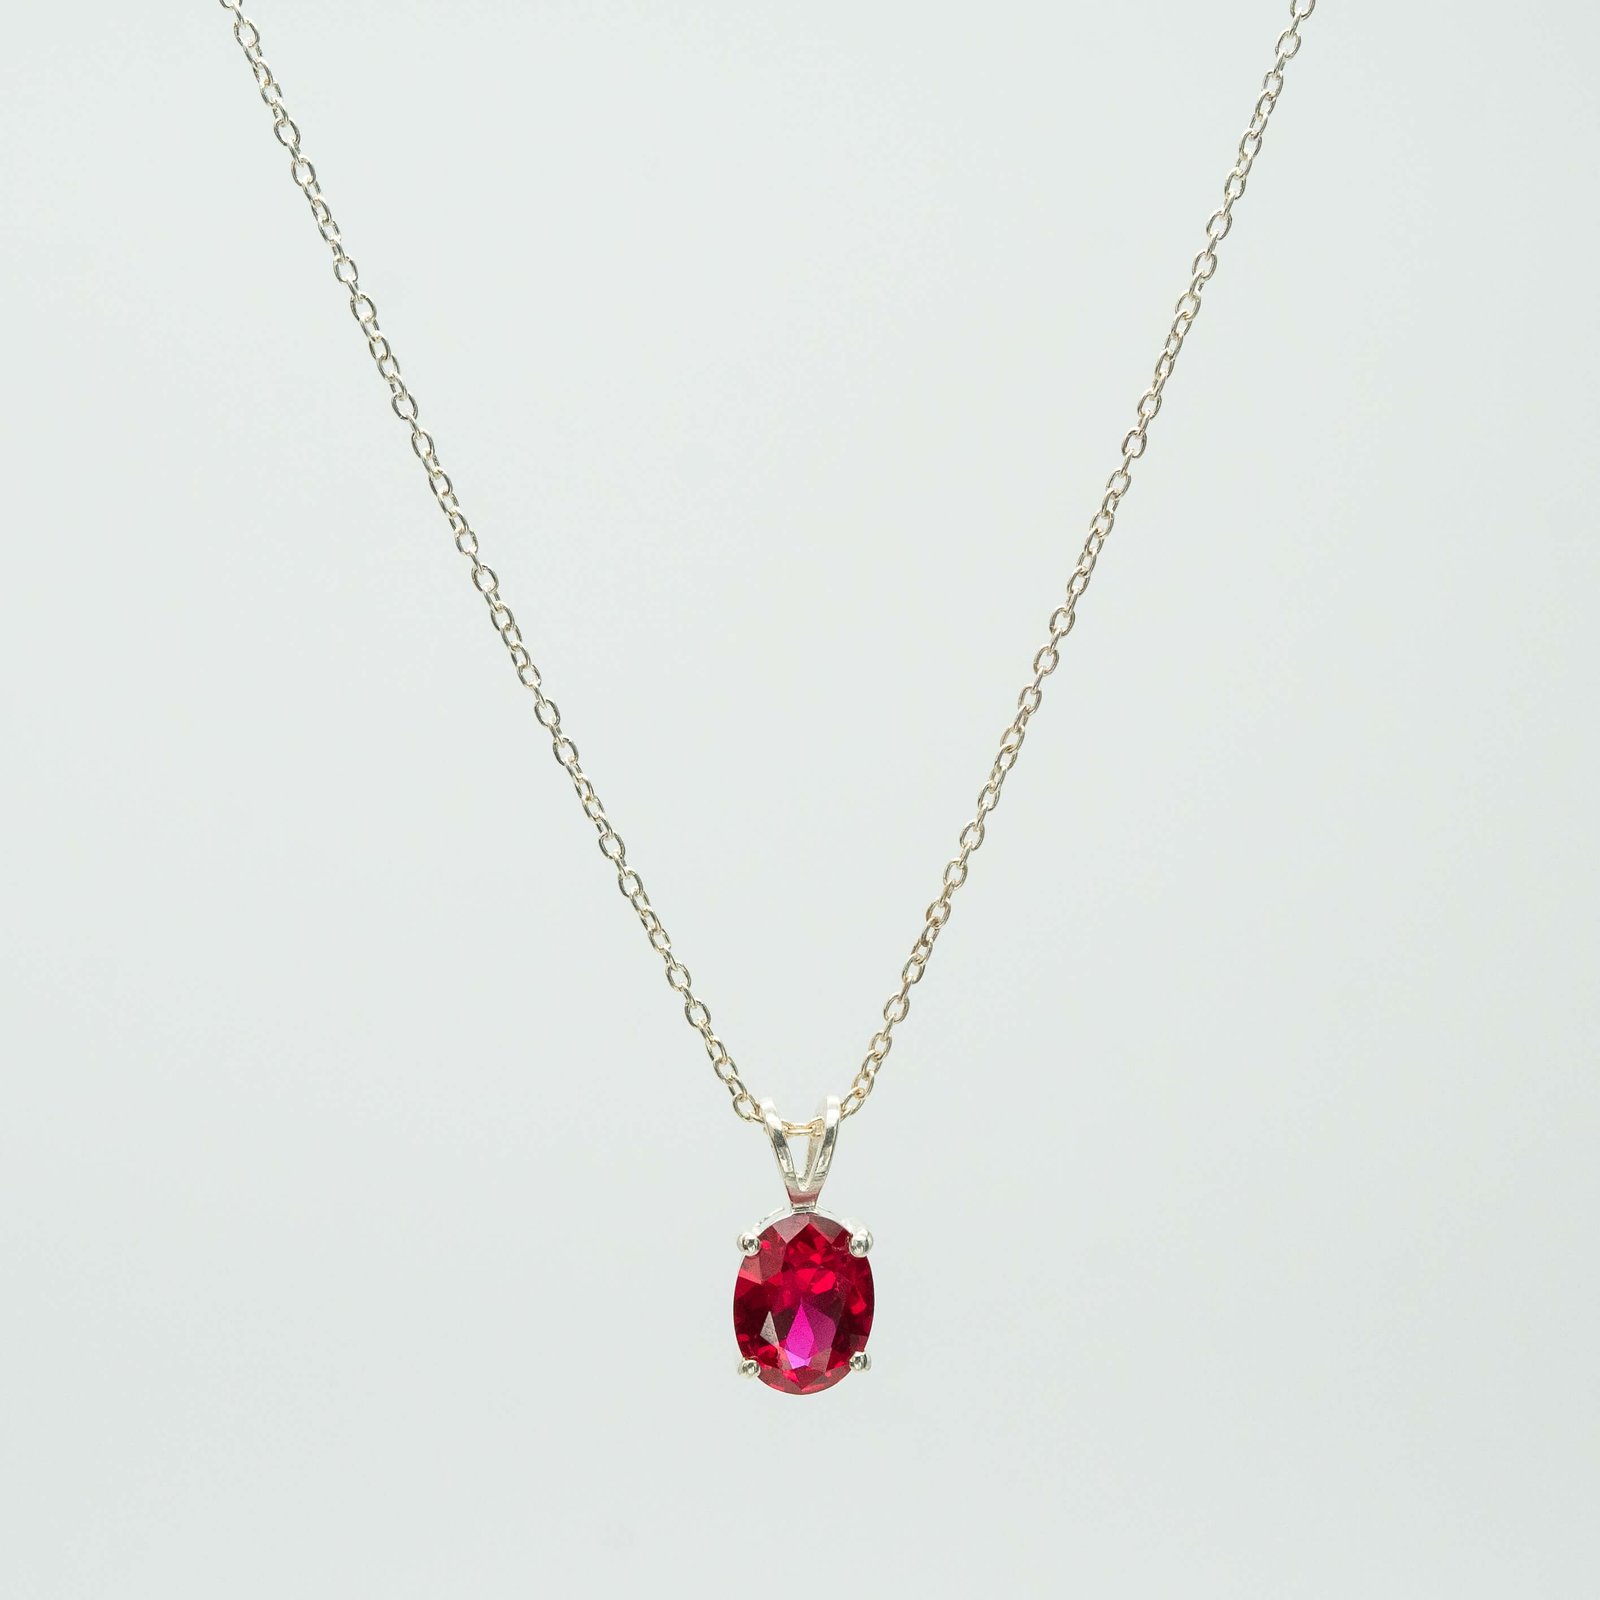 The Ruby Heart Necklace | SPARROW